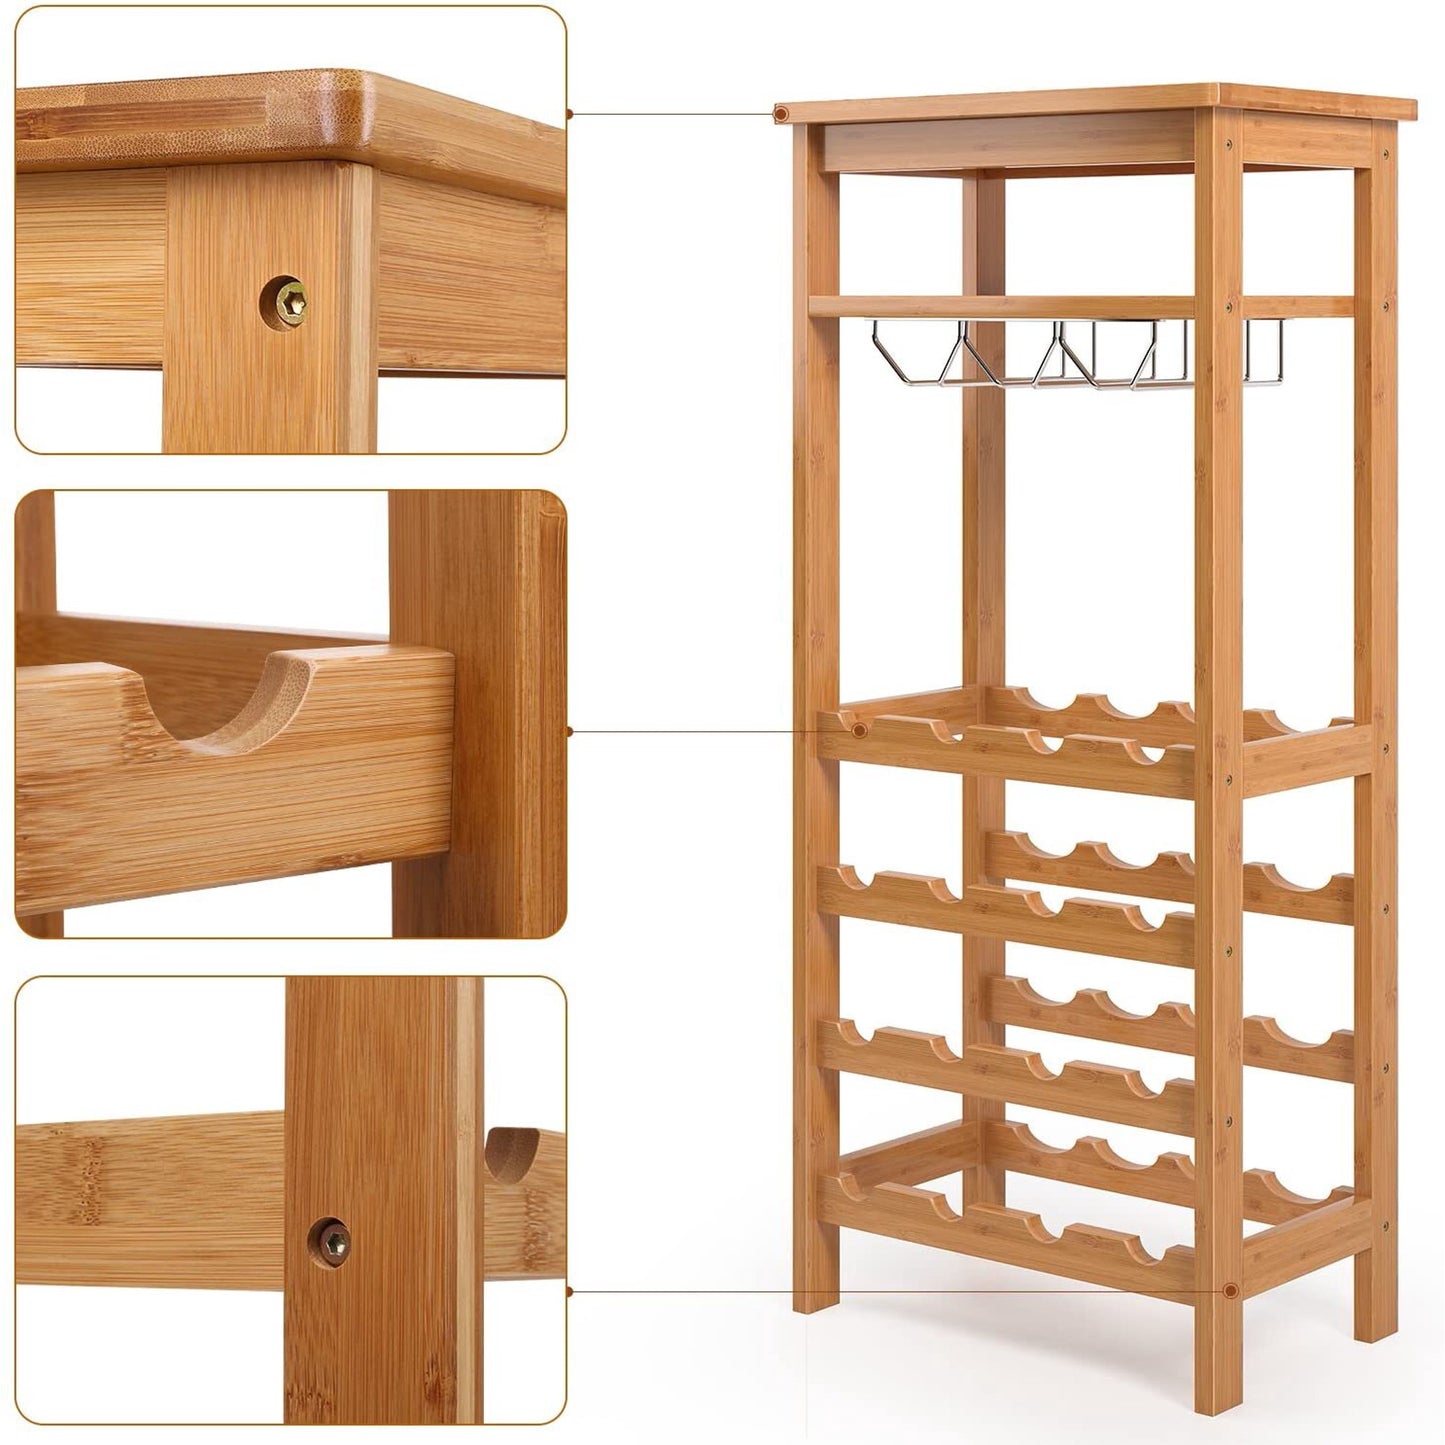 Homfa 4 Tier Bamboo Wine Rack, Free Standing Wine Storage Rack with Glass Holders for Home Kitchen, 16 Bottles Capacity, Natural Finish